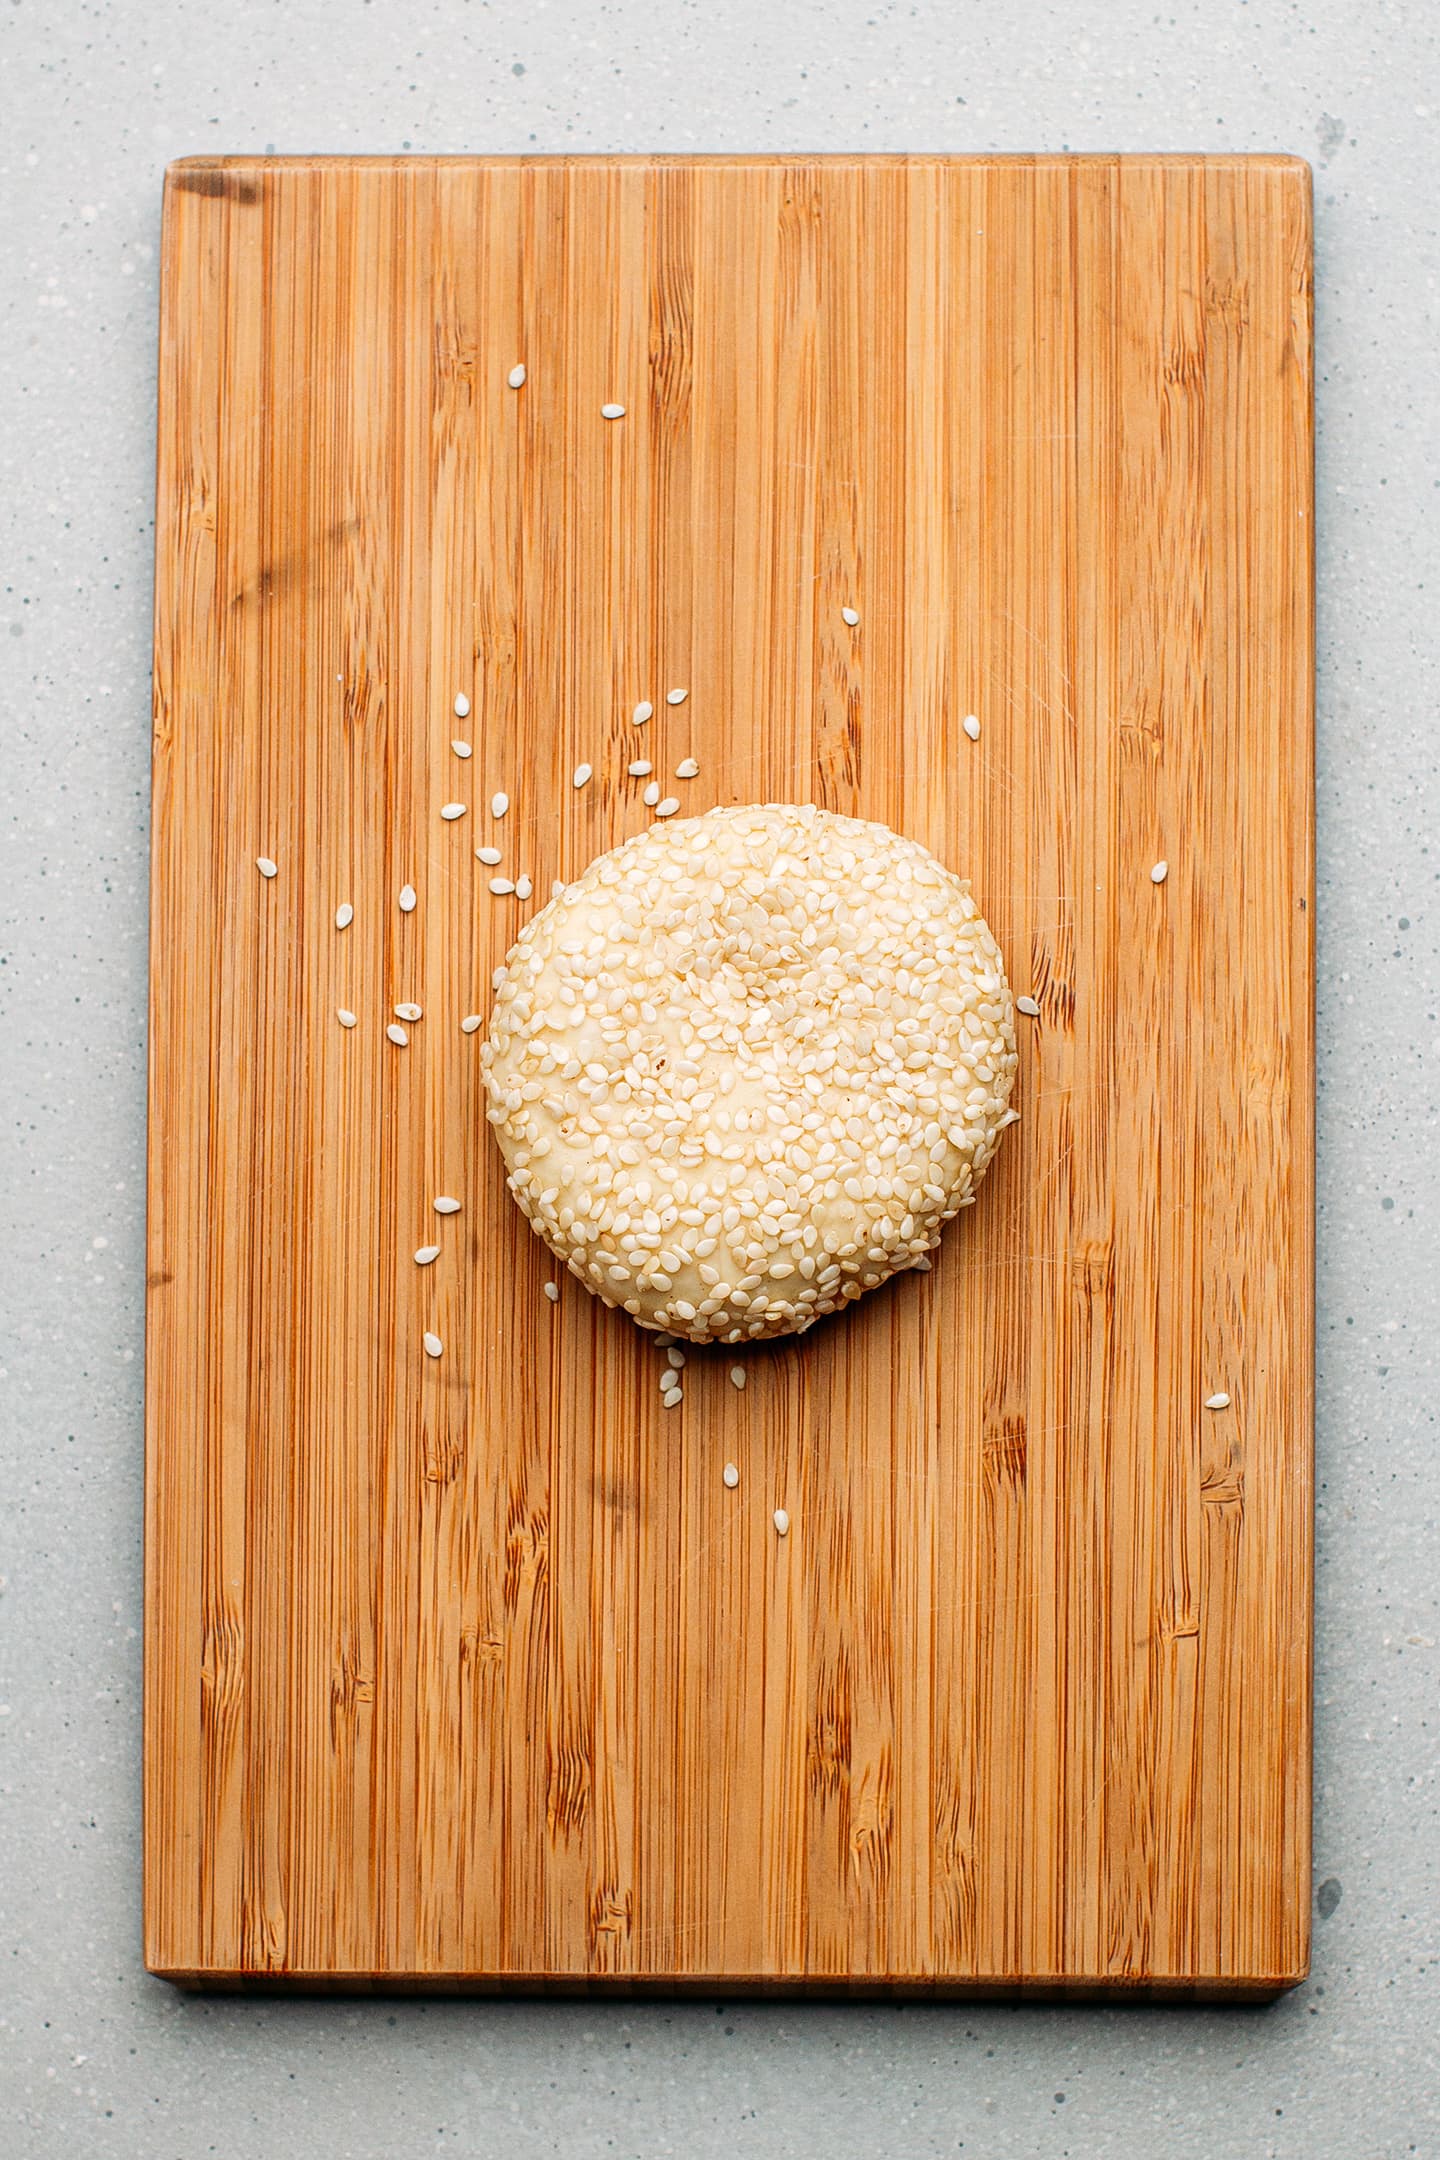 Ball of dough coated with sesame seeds on a cutting board.